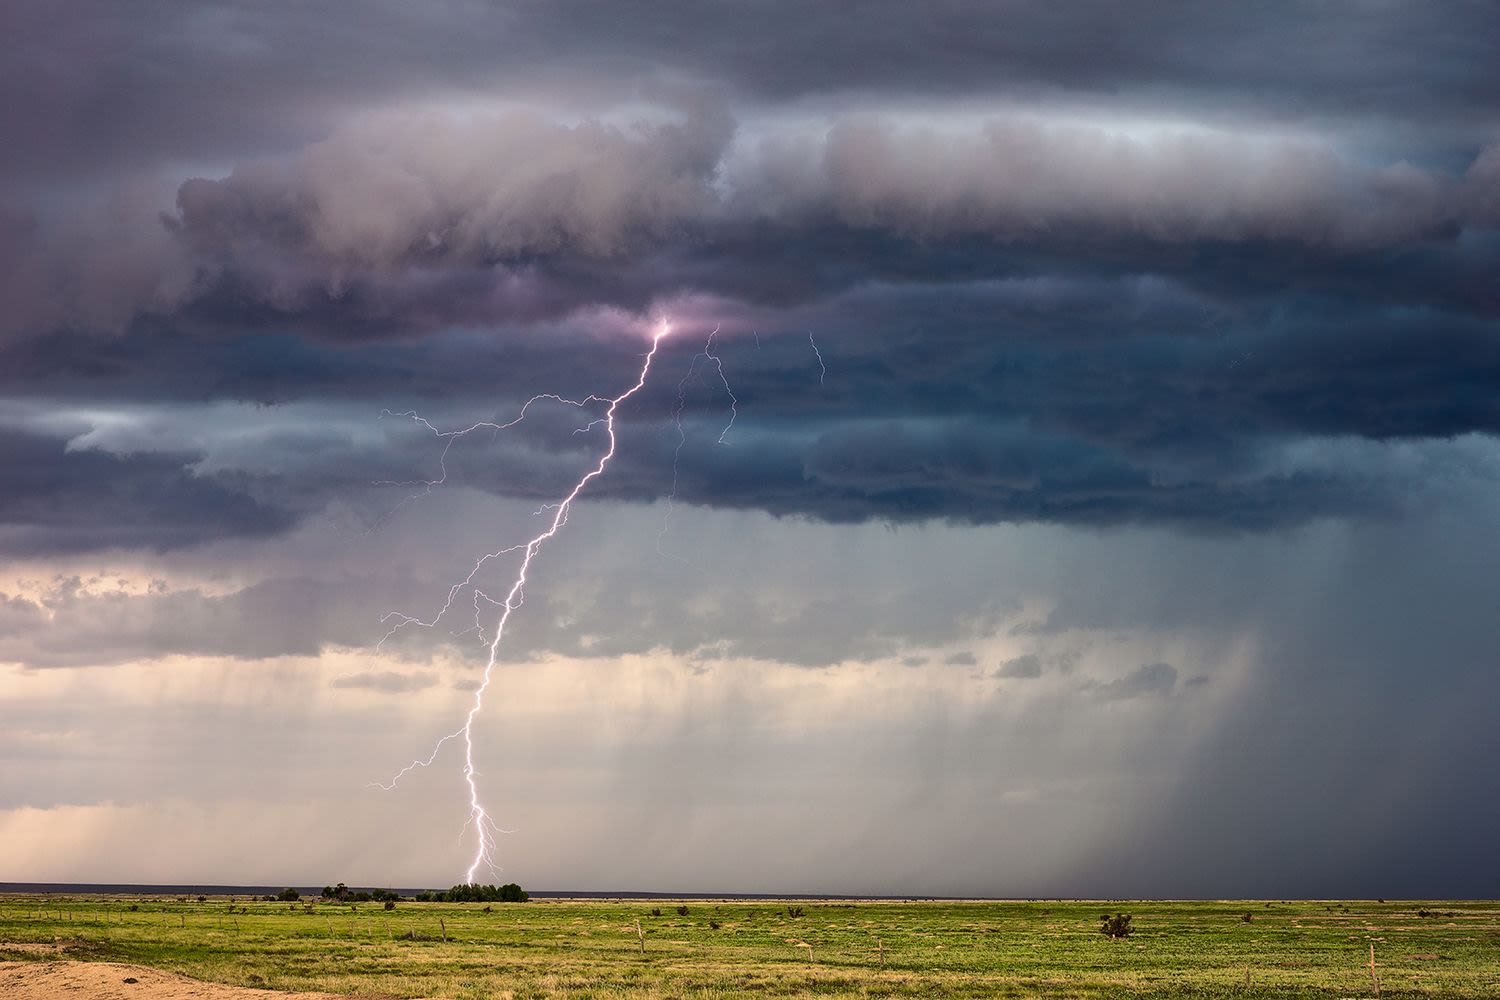 Rancher and 34 Cattle Killed by Same Lightning Strike in Colorado: 'It Hit Them All'